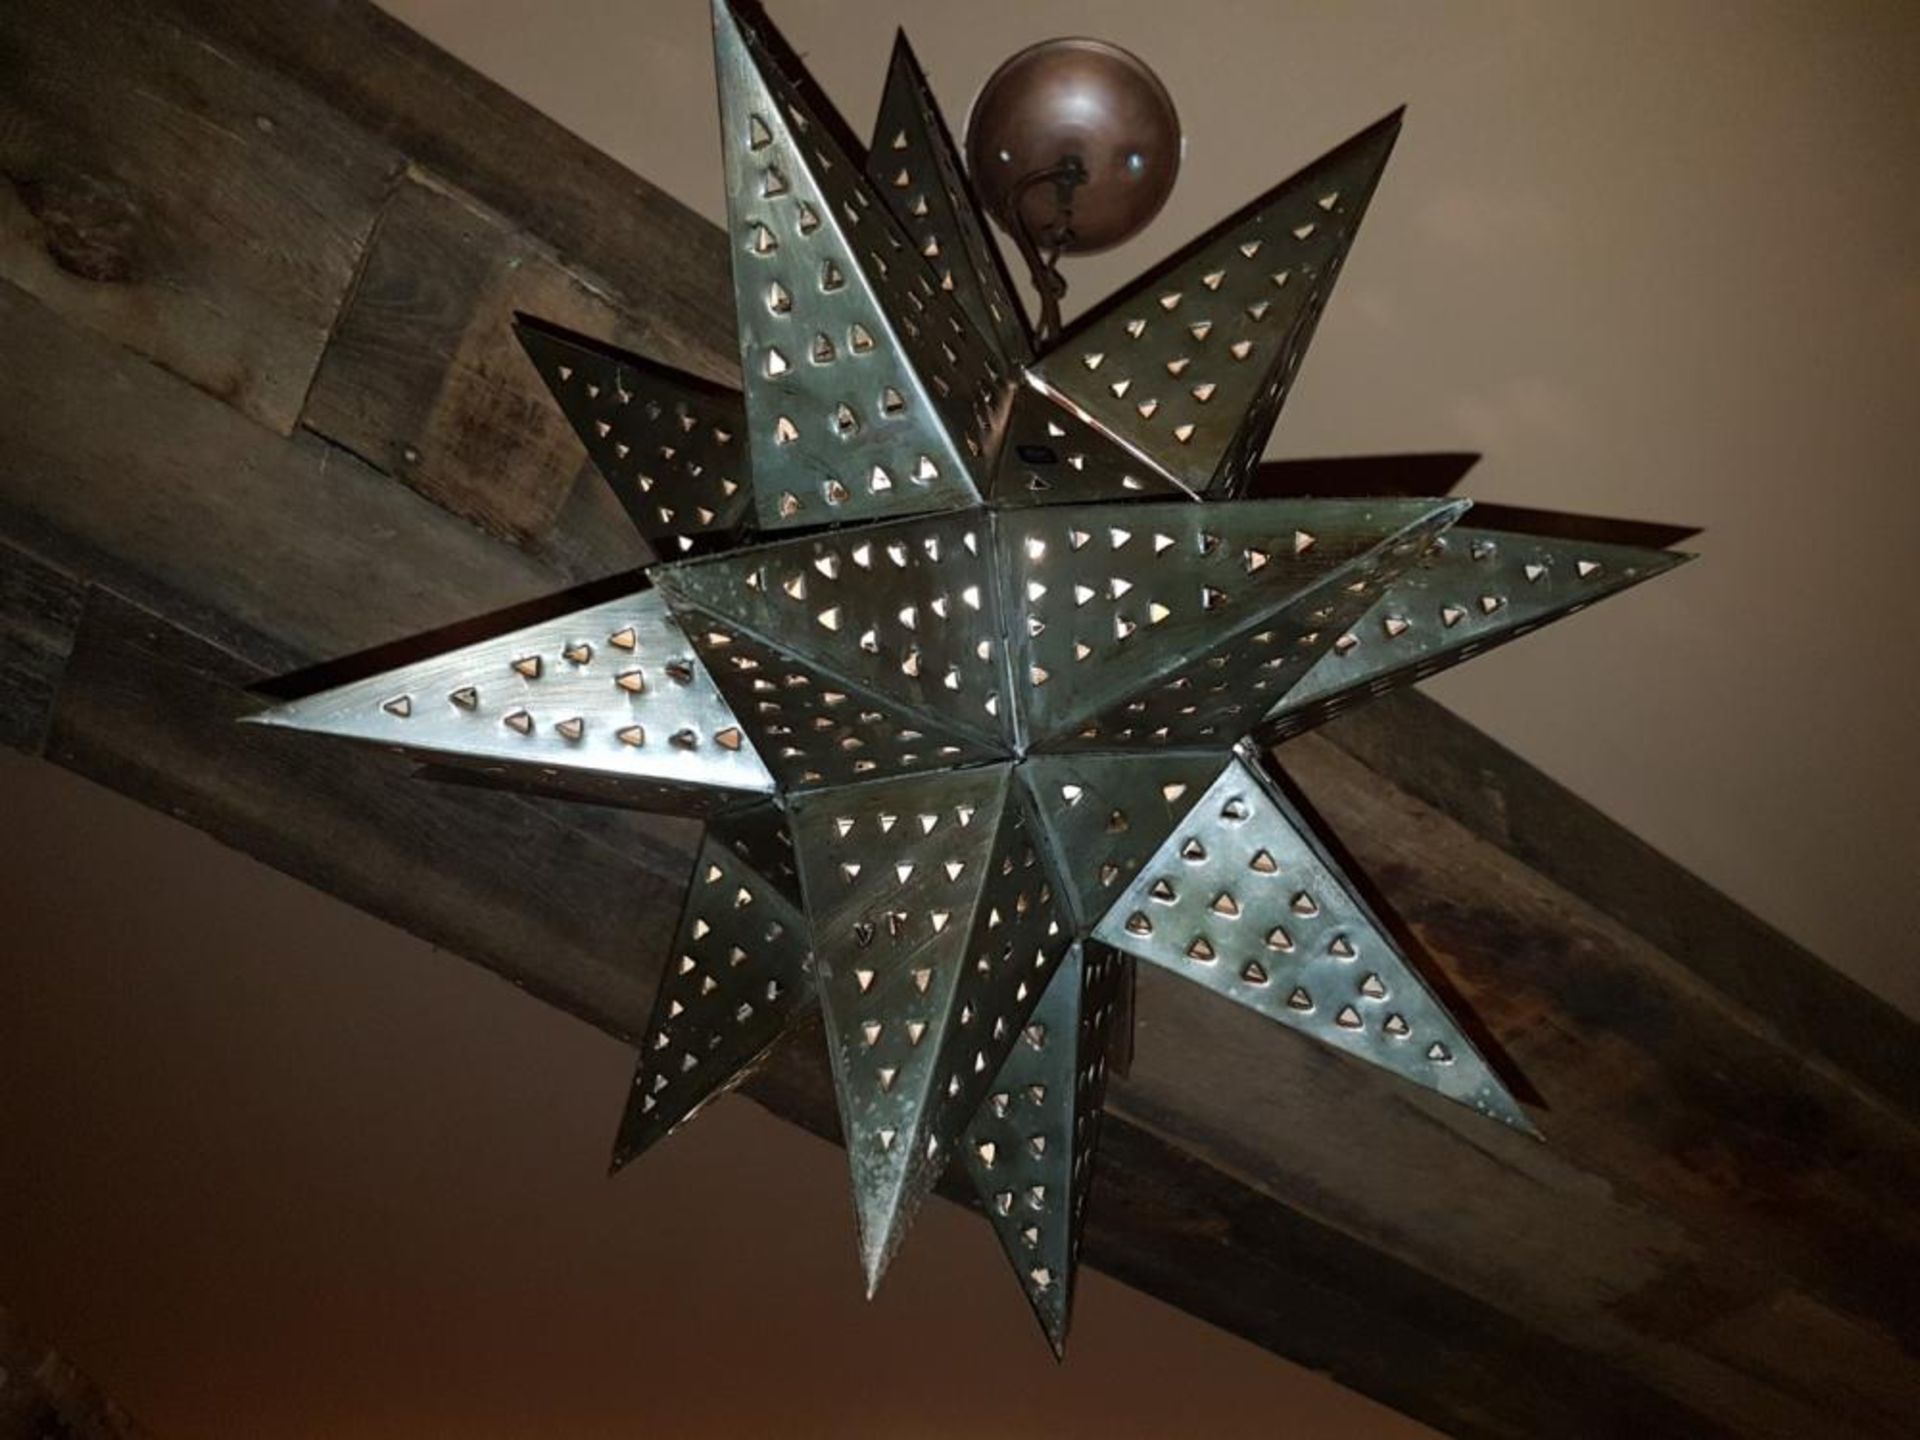 2 x Perforated Metal Star Shaped Pendant Light Fittings - 80cm Drop x 40cm Diameter - CL796 - Ref: - Image 3 of 3